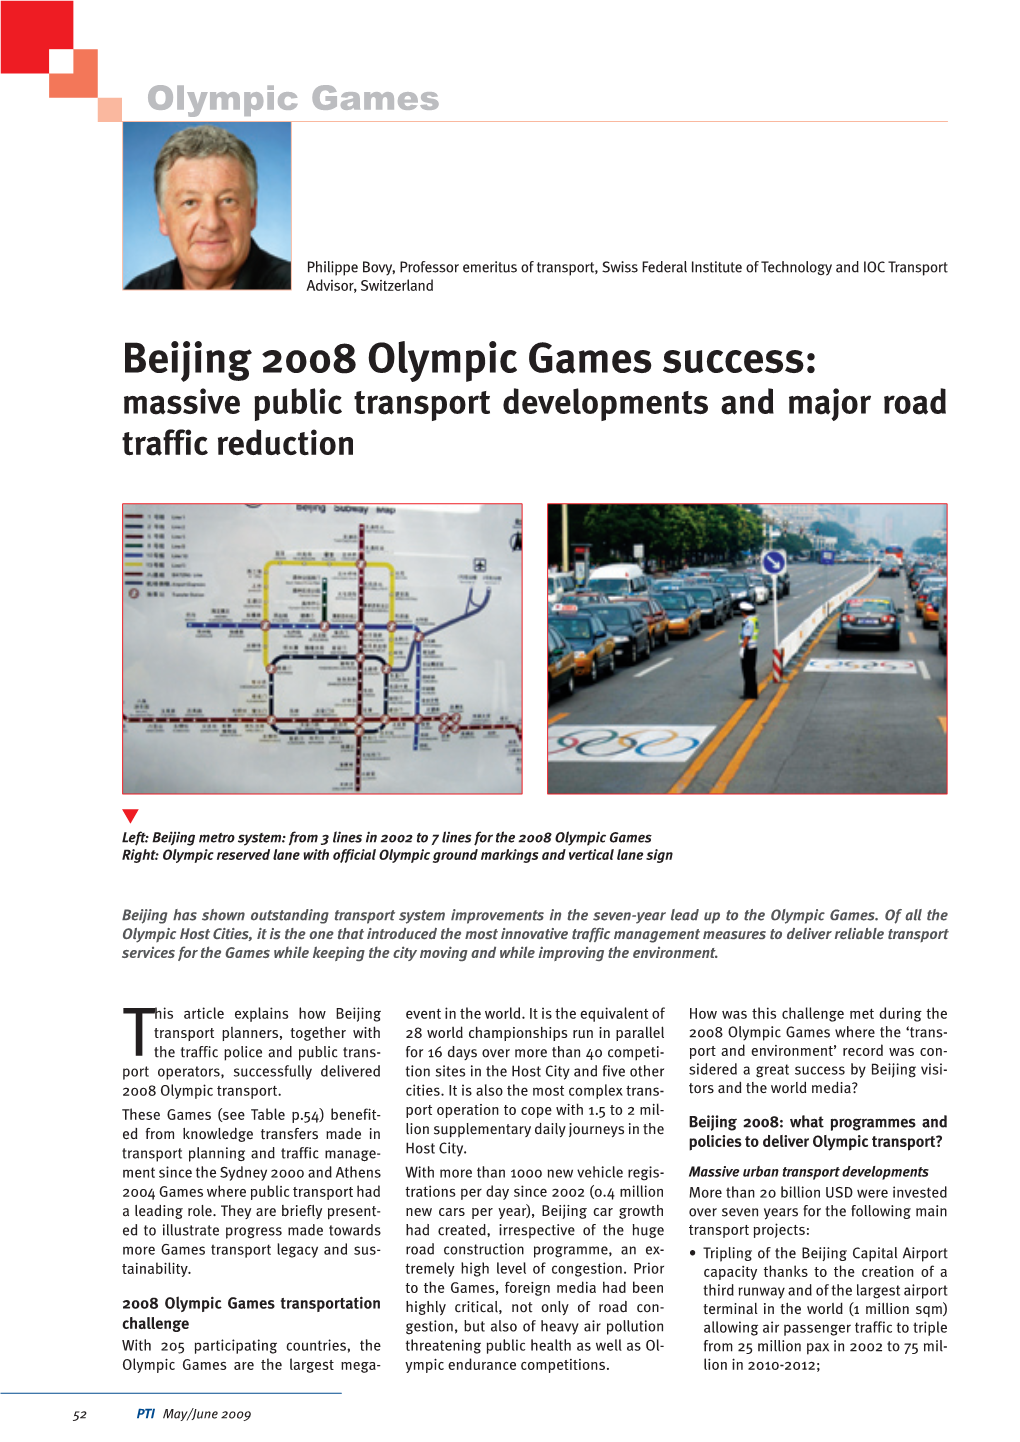 Beijing 2008 Olympic Games Success: Massive Public Transport Developments and Major Road Traffic Reduction